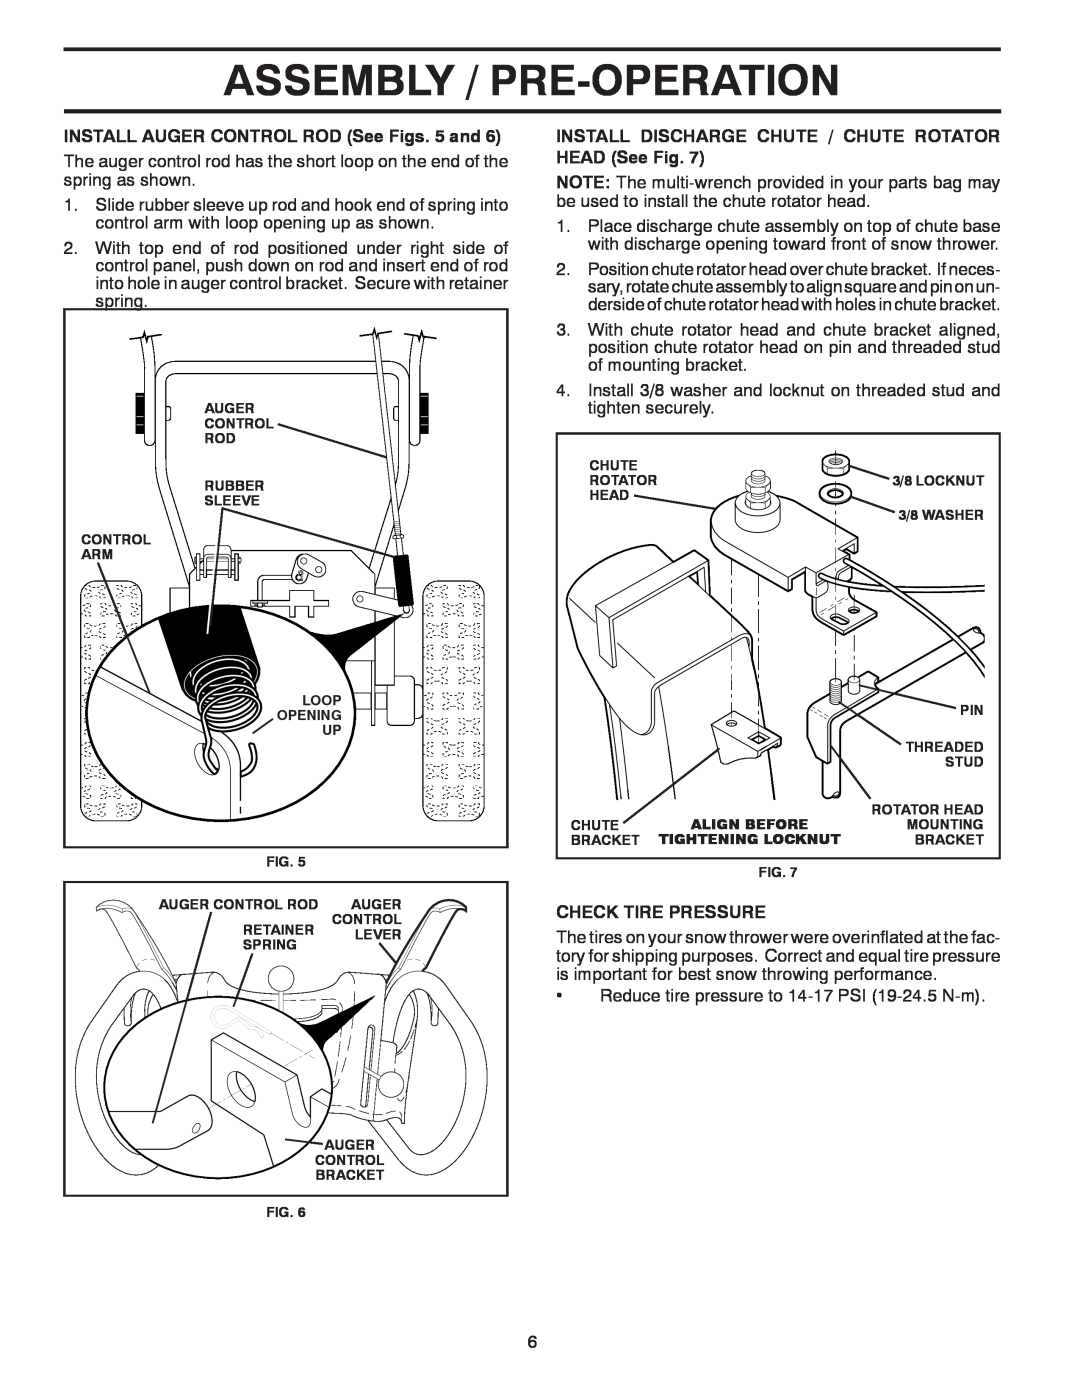 Poulan 415308, 96198002000 Assembly / Pre-Operation, INSTALL AUGER CONTROL ROD See Figs. 5 and, Check Tire Pressure 